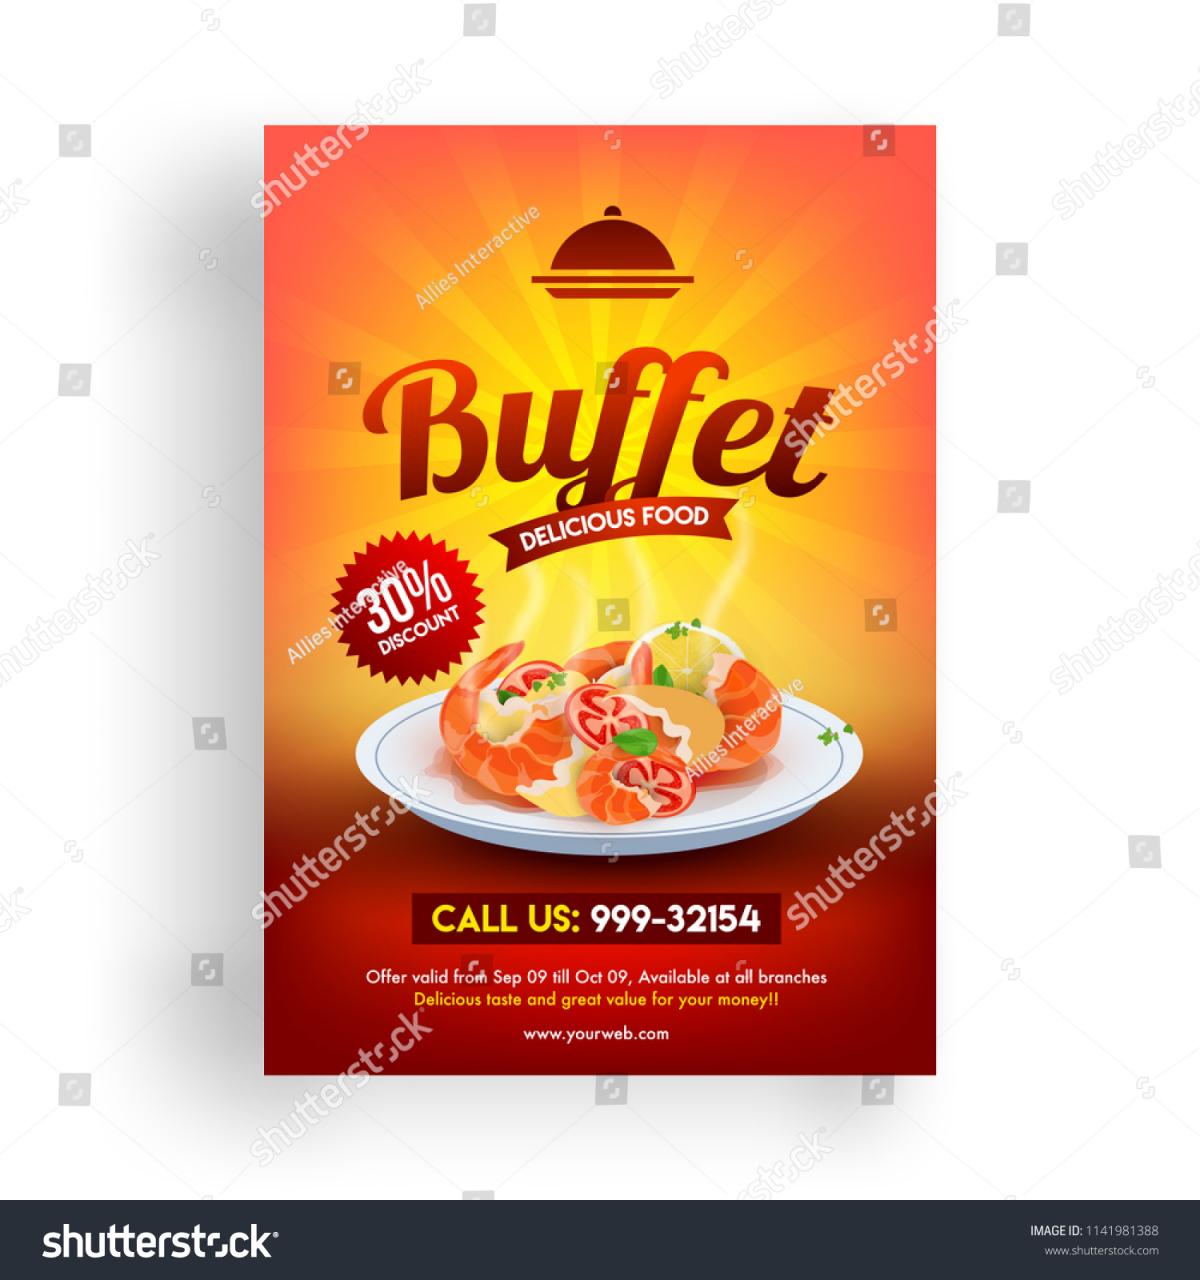 30% discount offer flyer of Buffet Delicious food template design for restaurants.